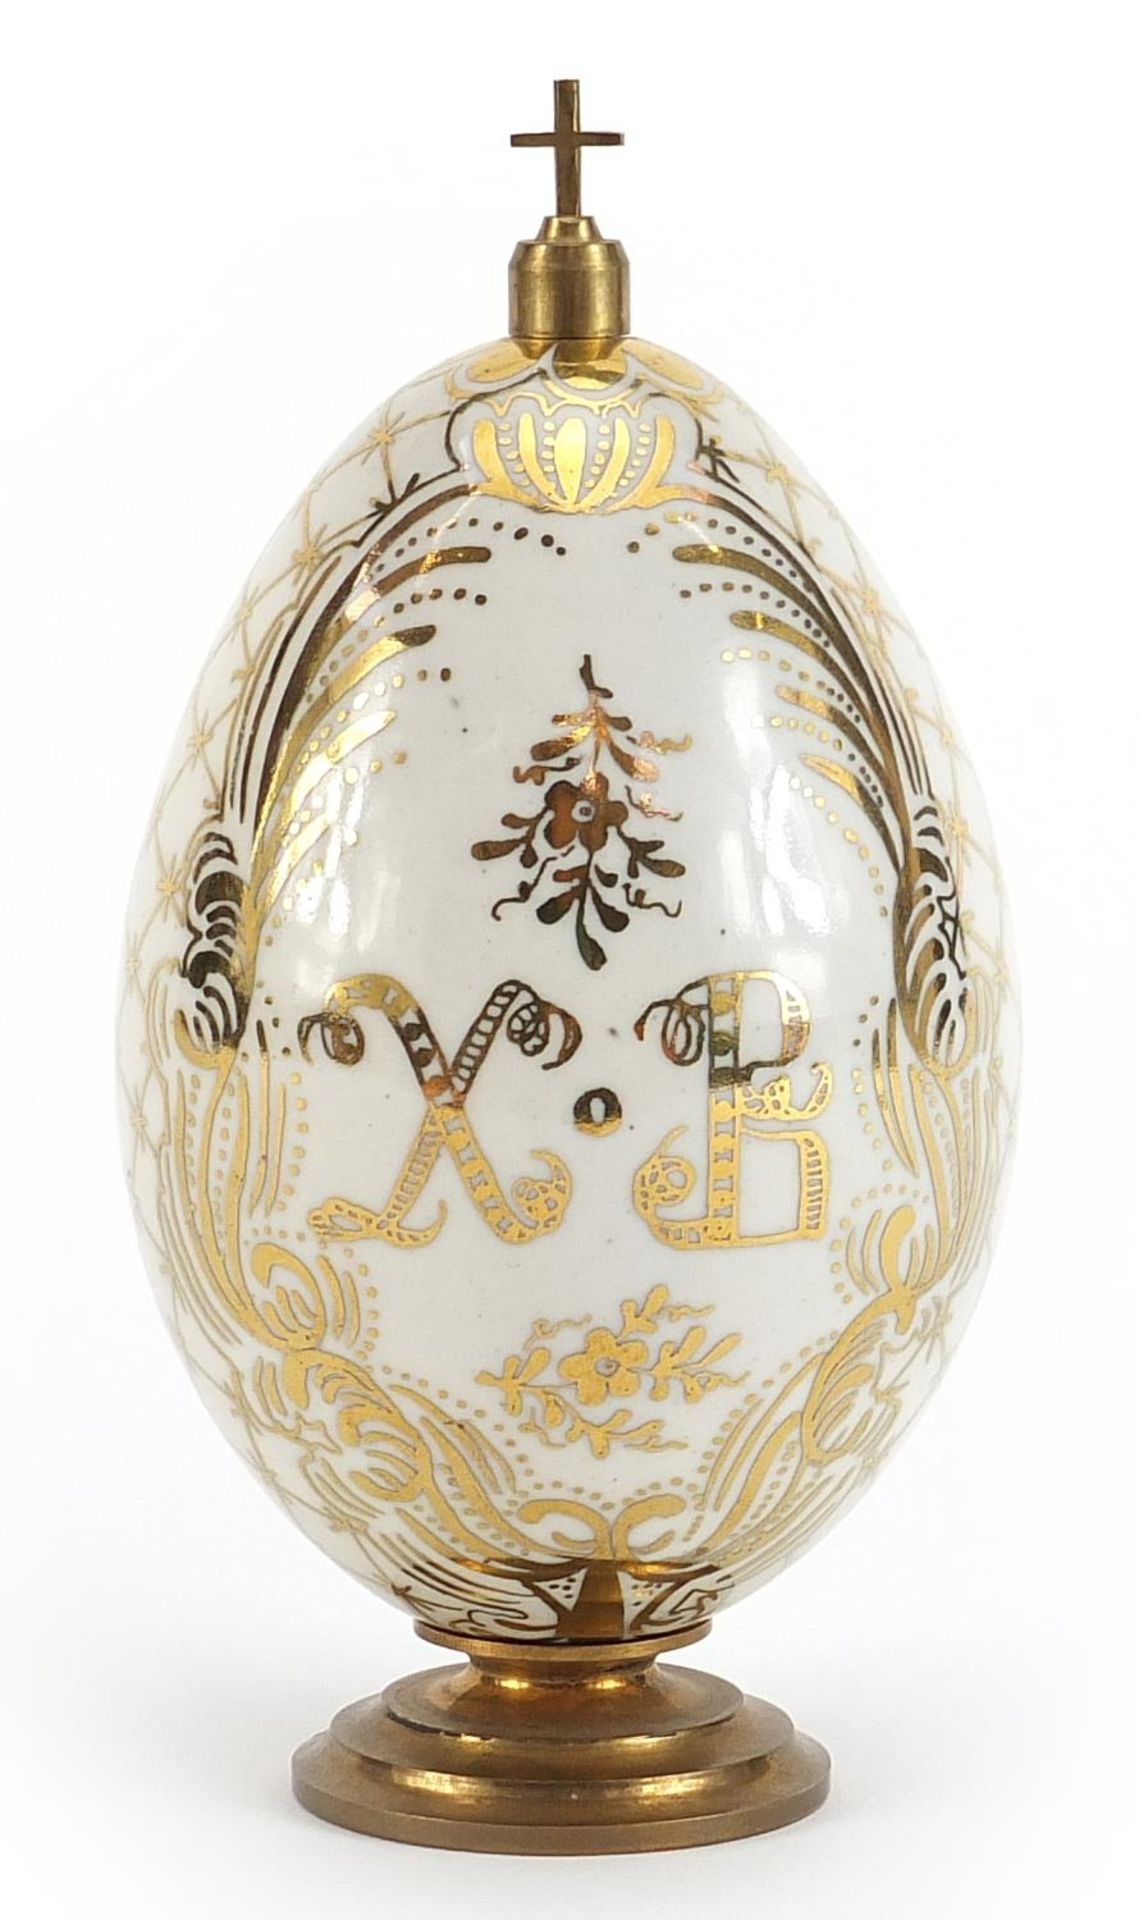 Antique Russian porcelain Easter egg on metal stand with cross, the egg hand painted with panels - Image 2 of 3